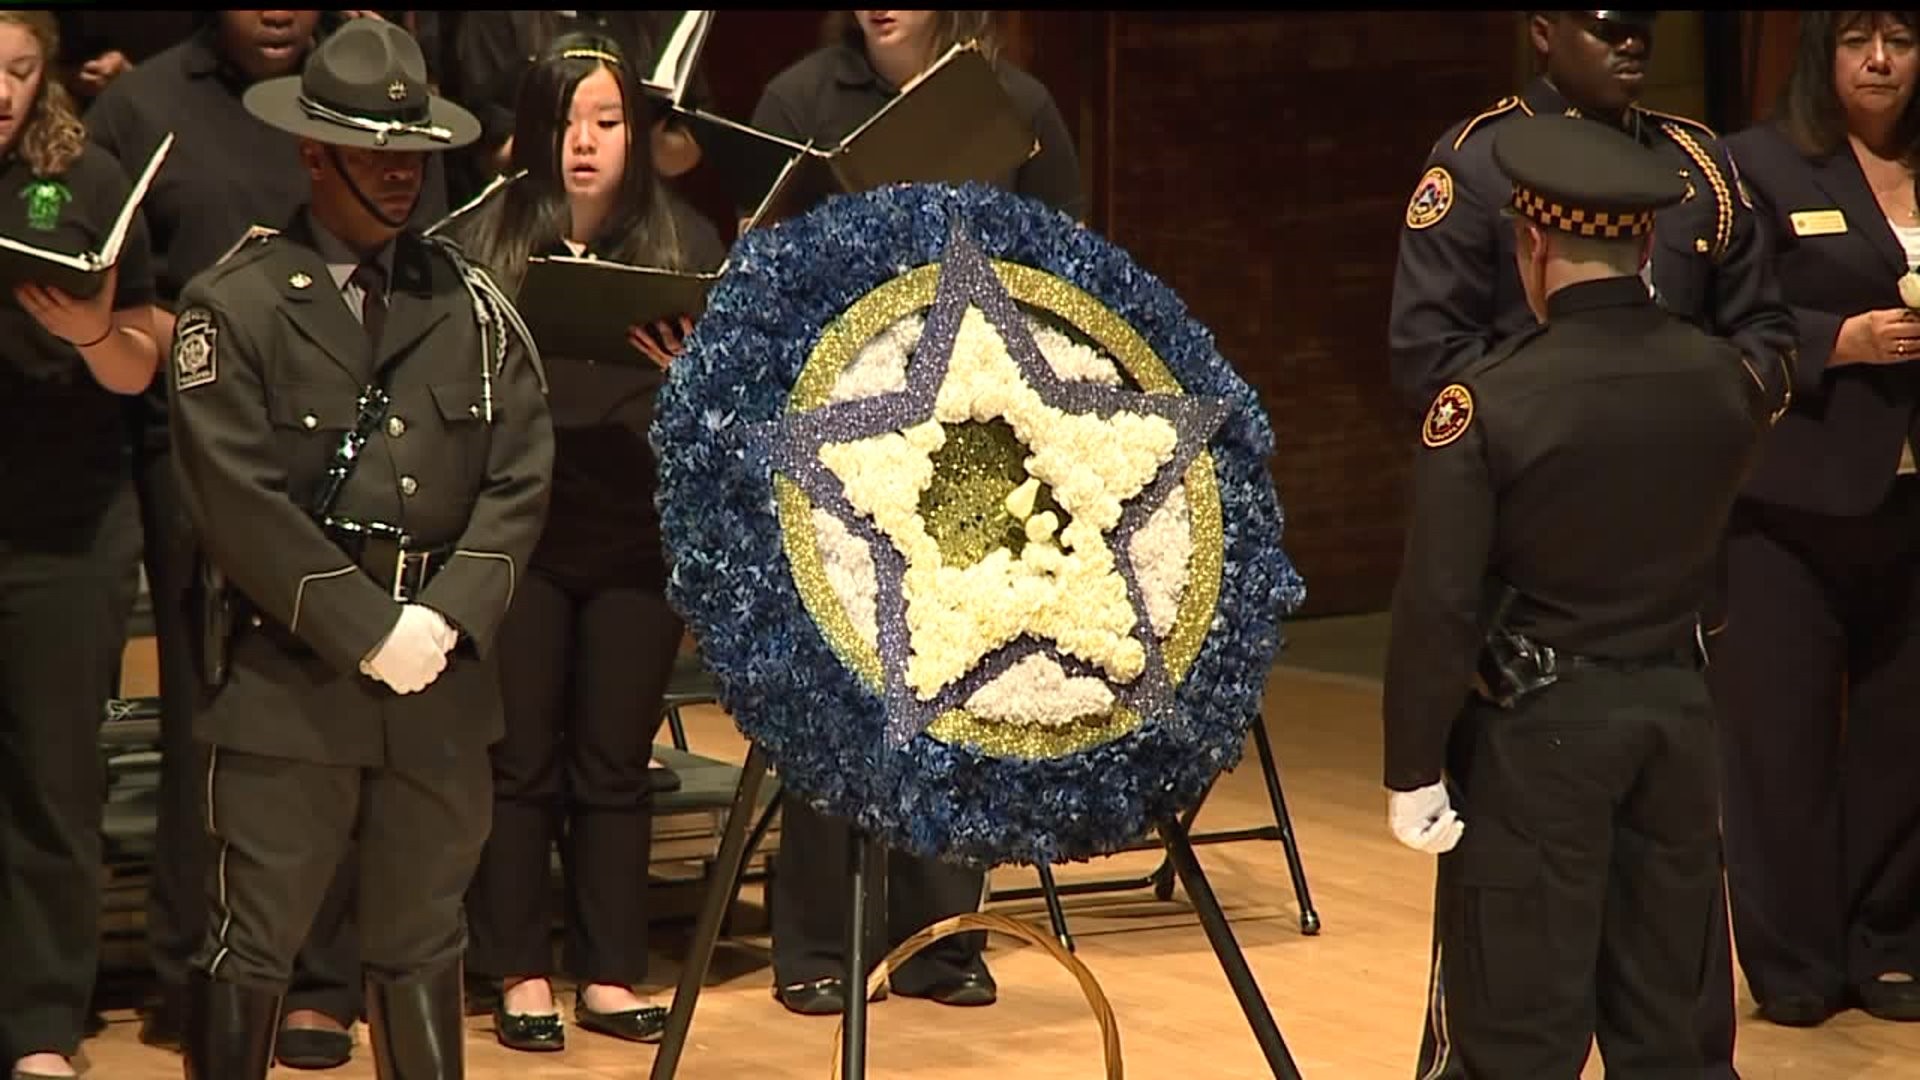 Fallen police officers remembered